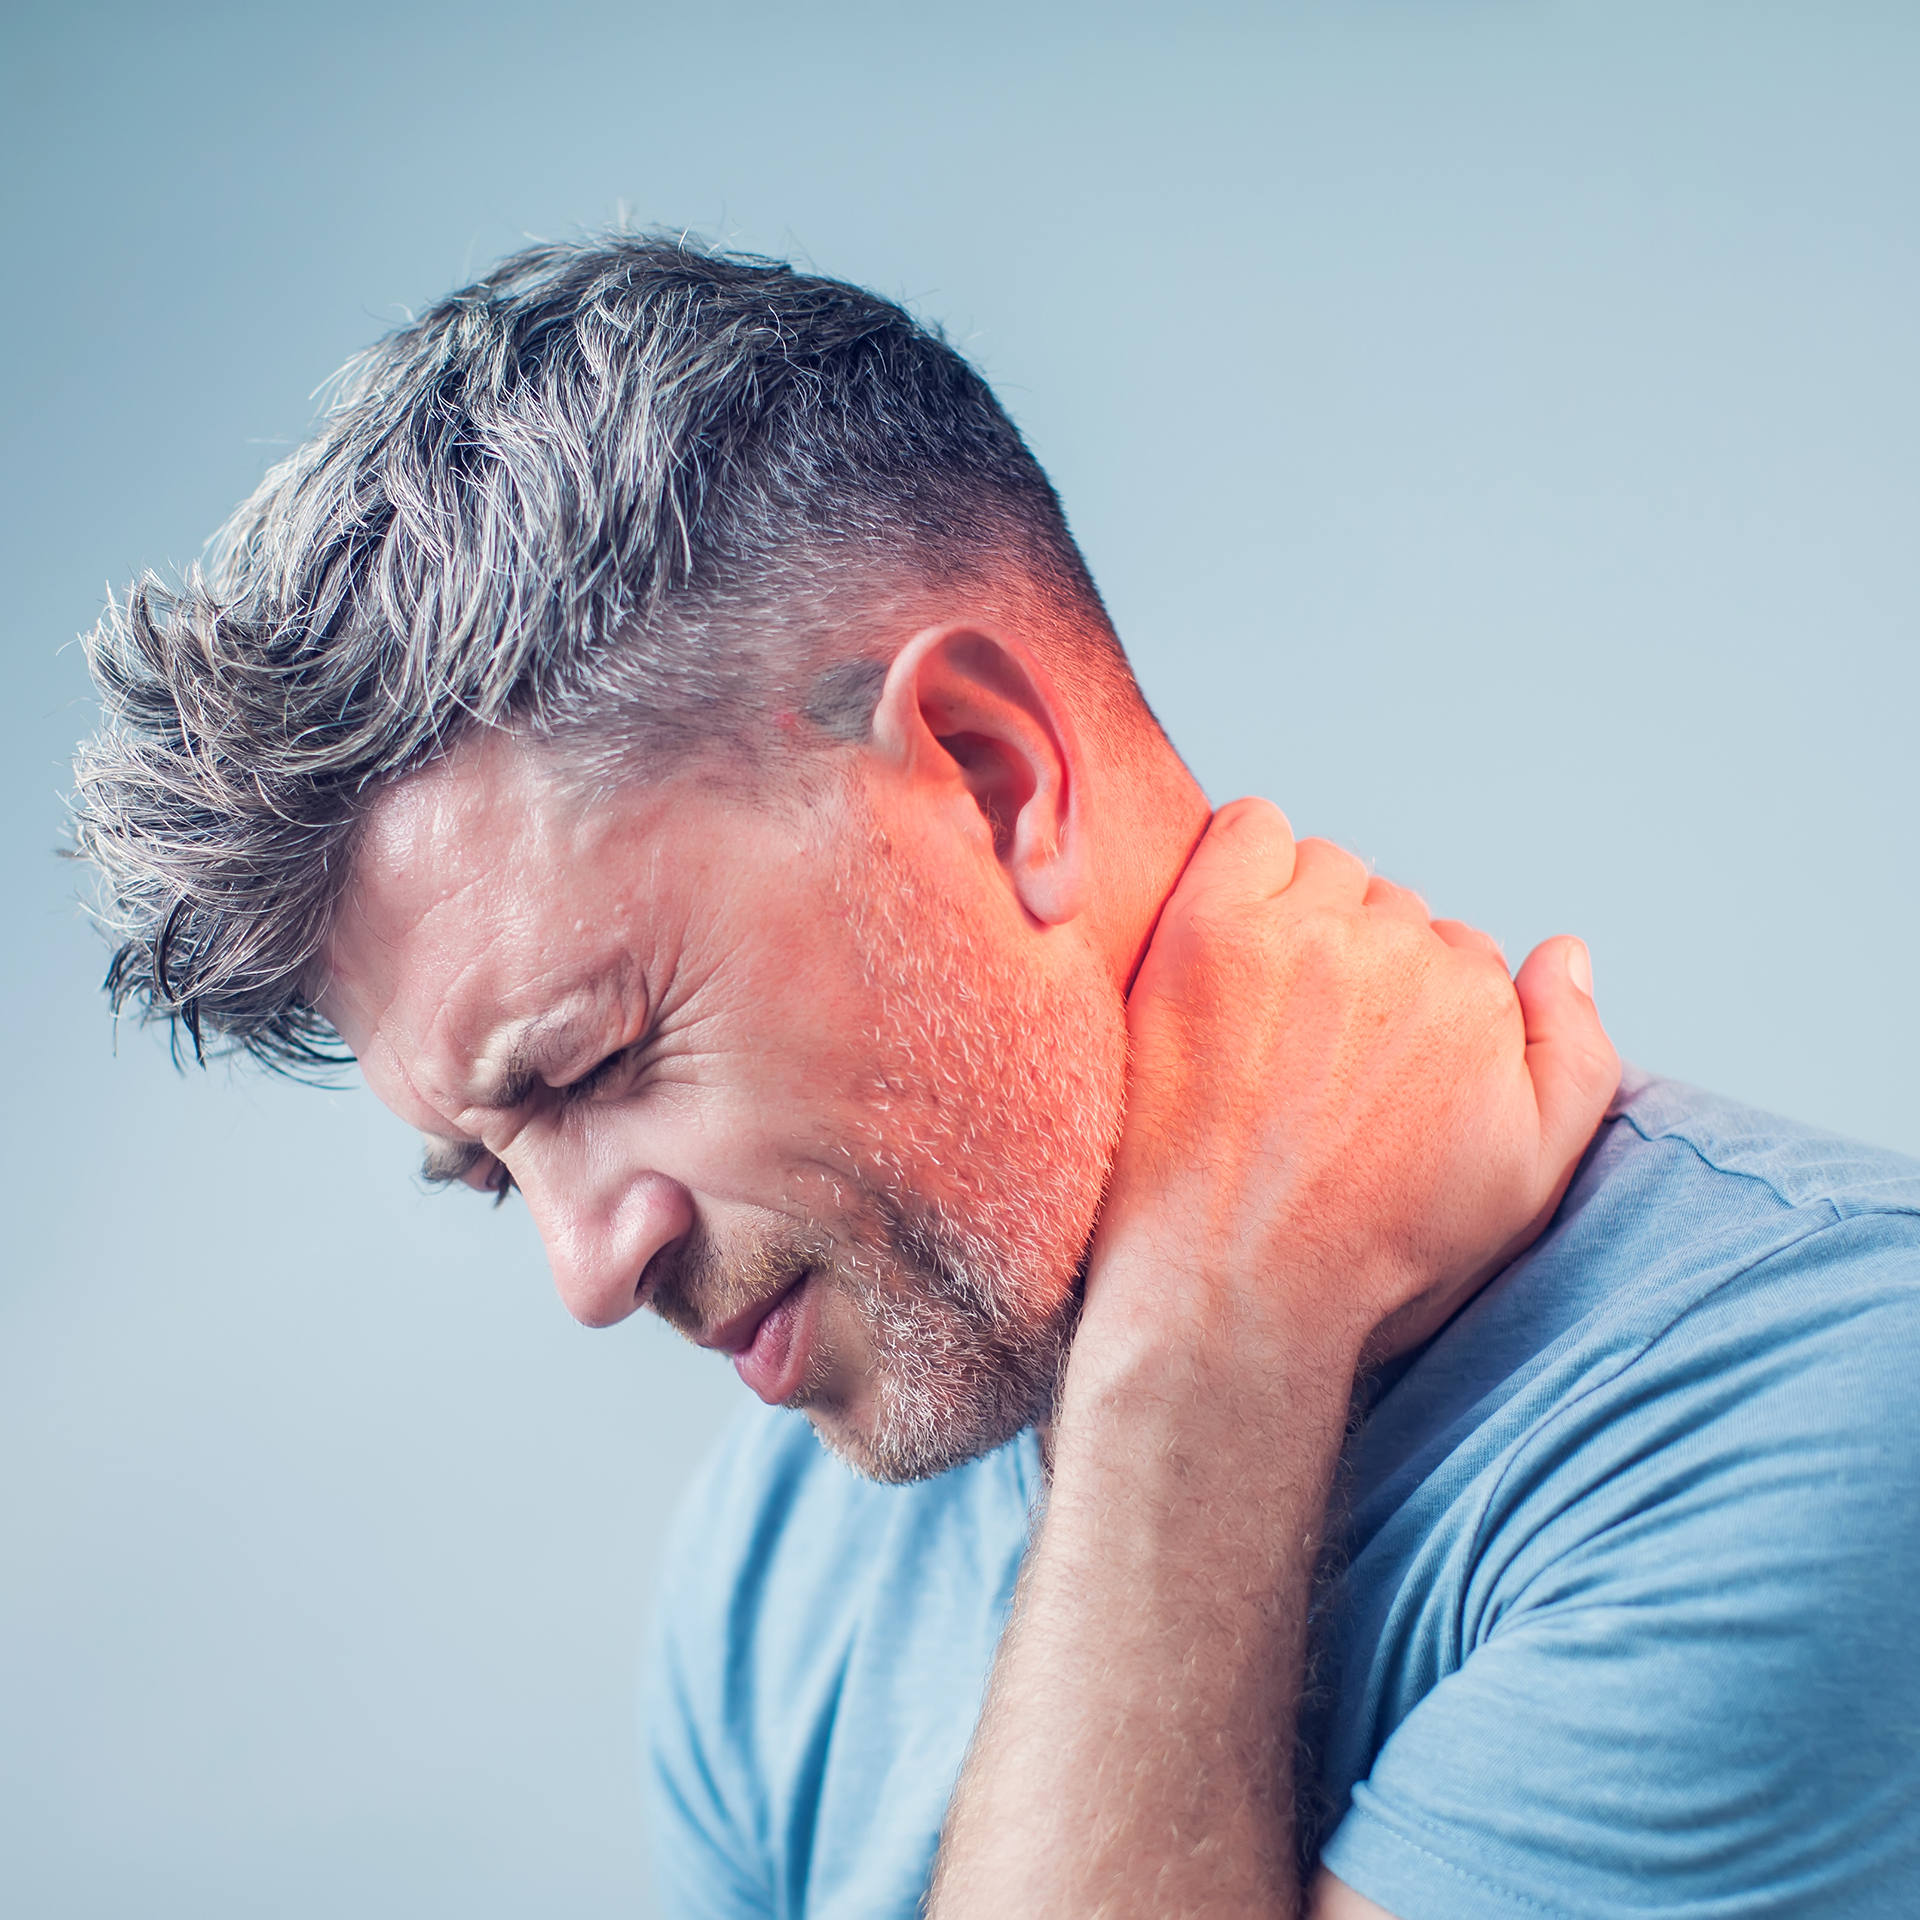 Young man suffering from neck pain